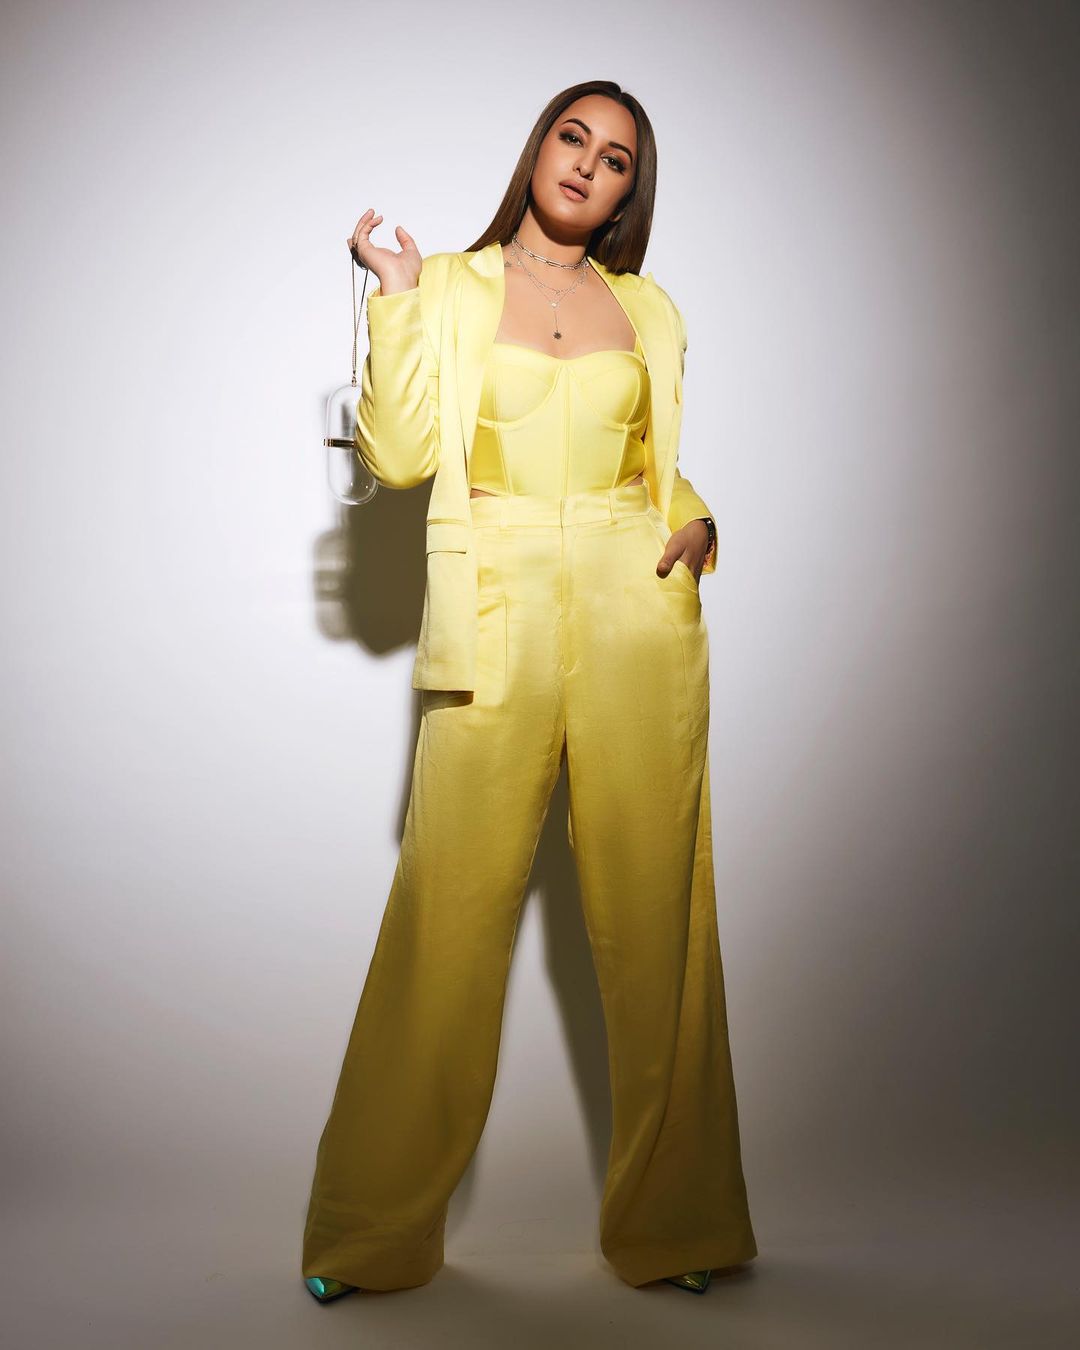 Sonakshi Sinha looked uber chic in the yellow satin pantsuit over the matching corset top